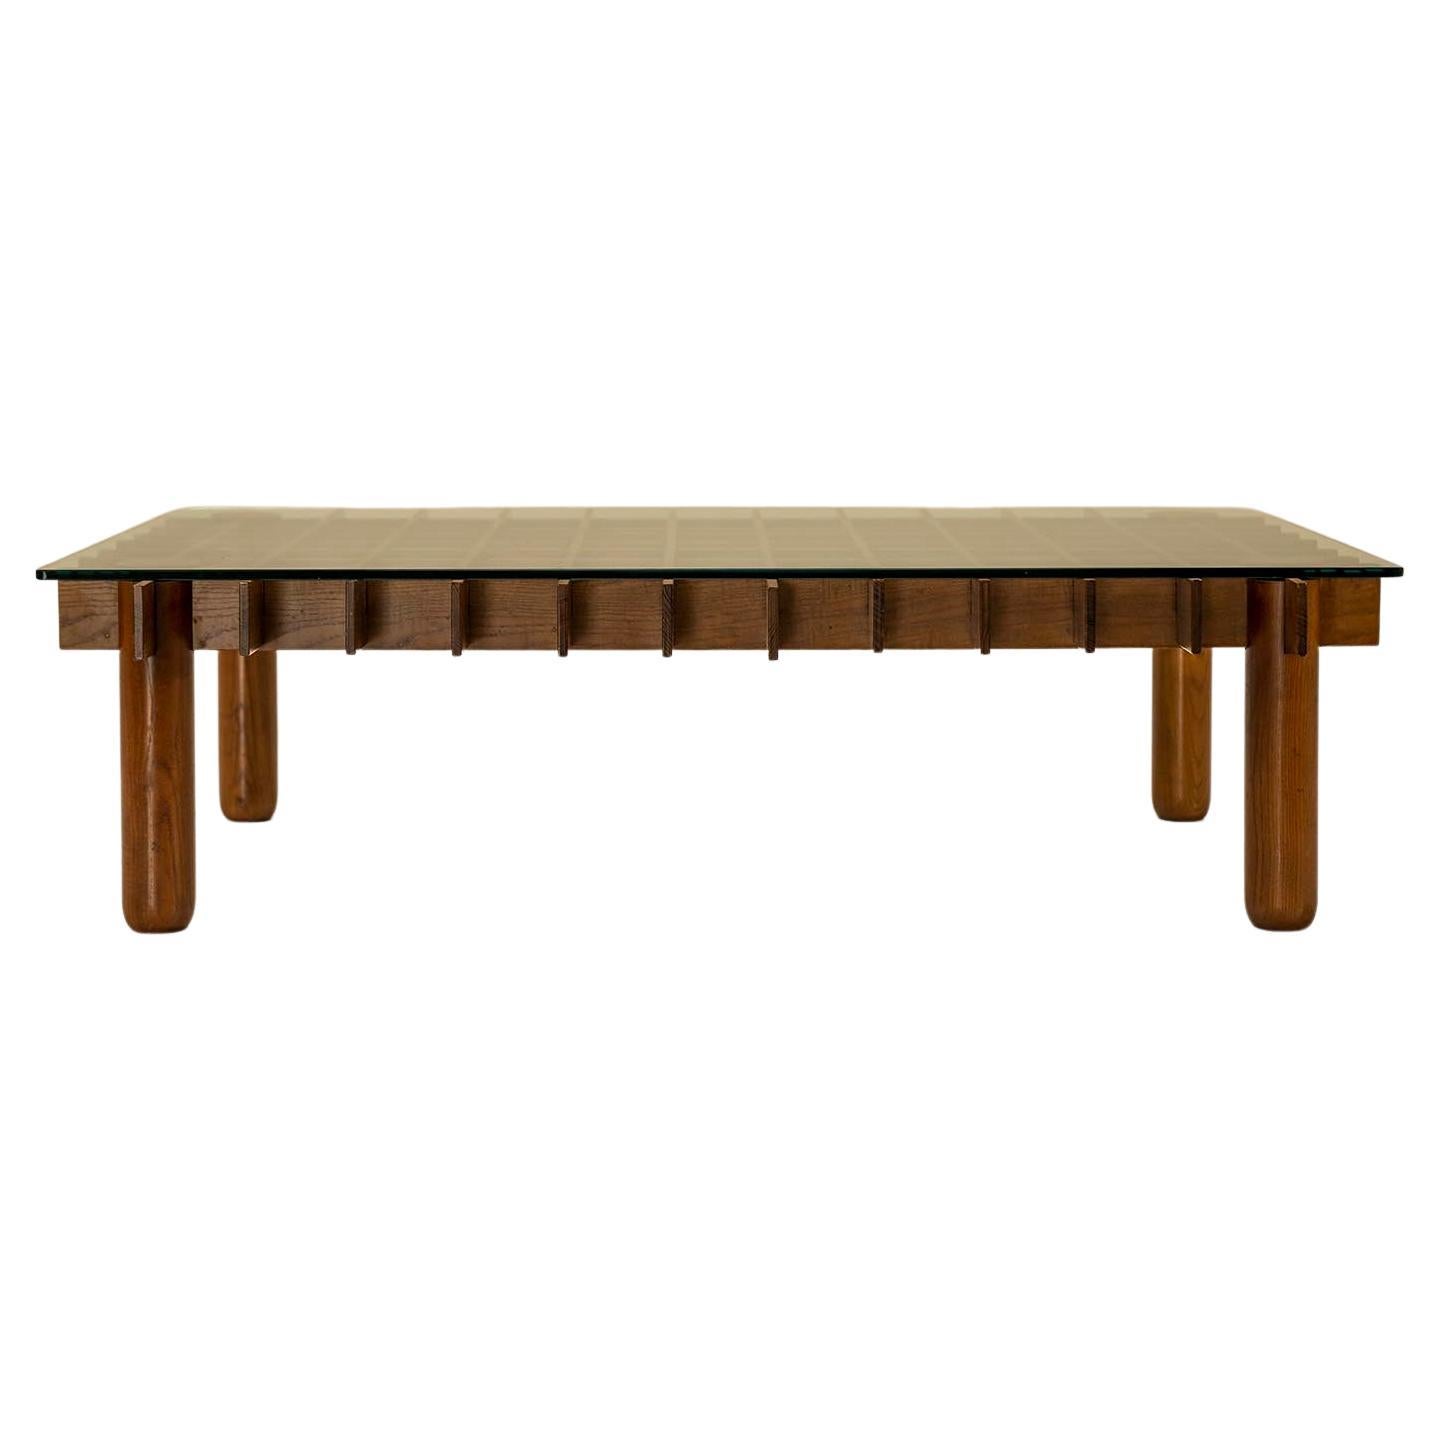 Graphic Rectangular Coffee Table in Maple Wood, Italy, 1970s